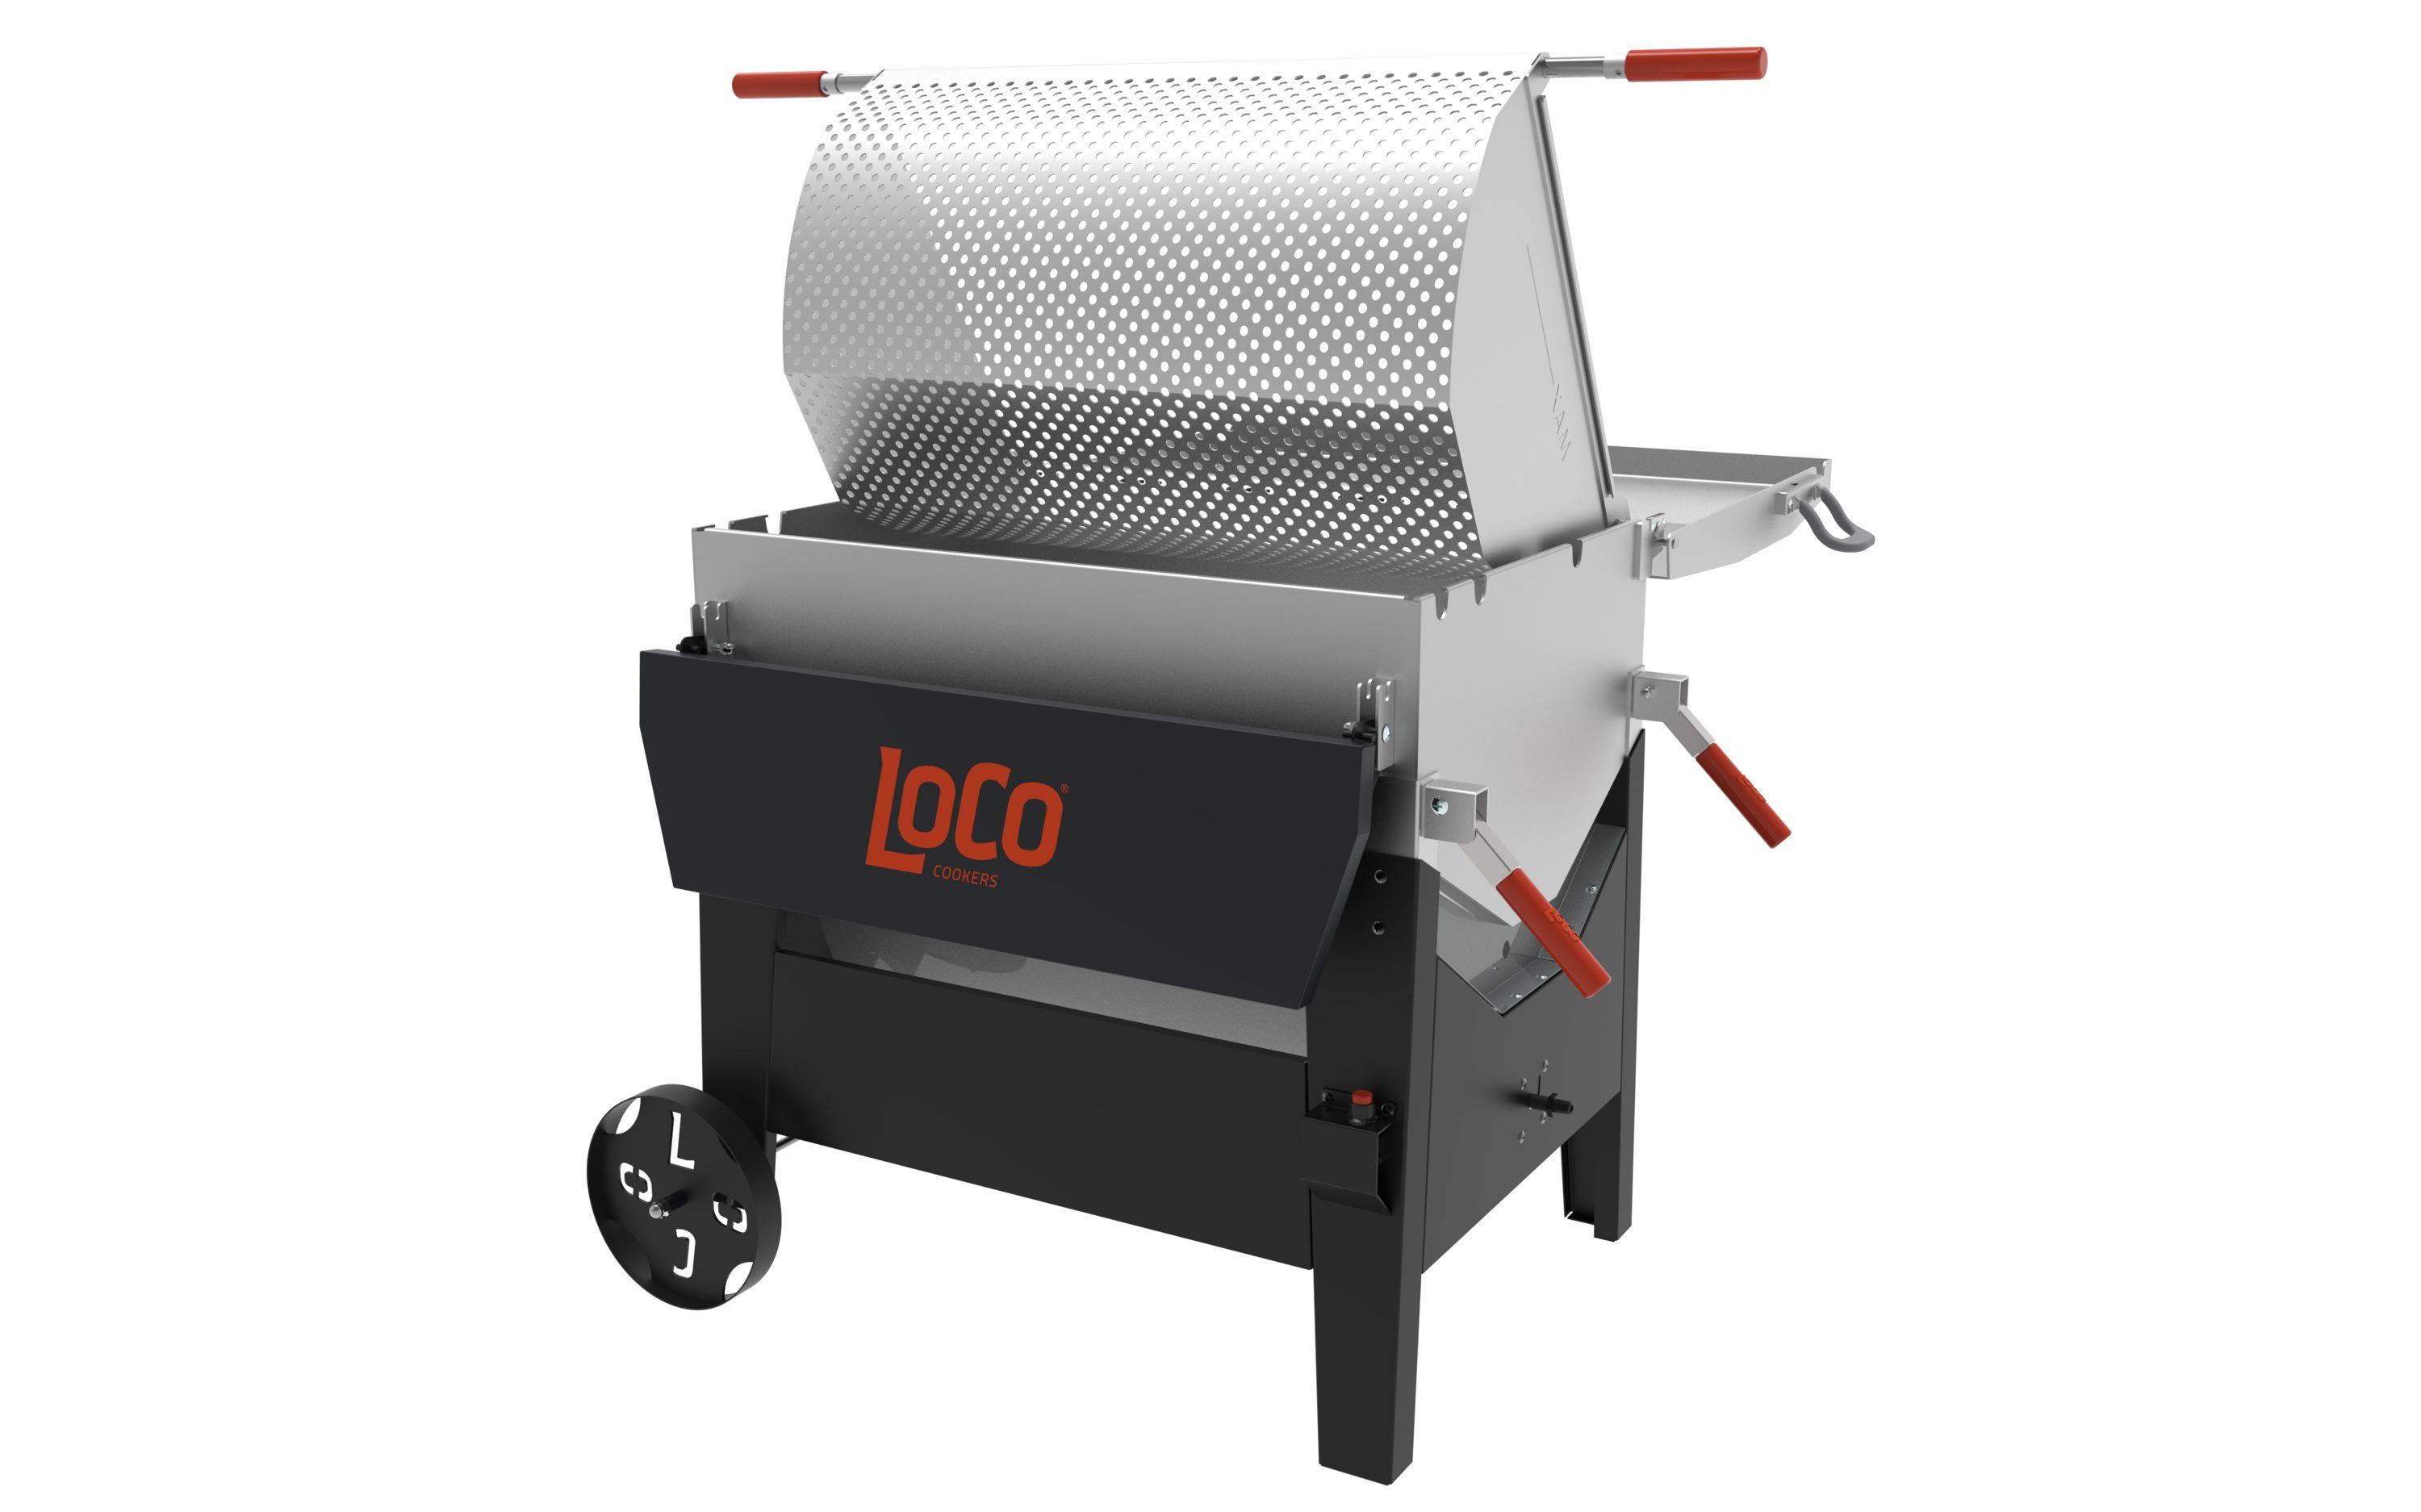 Save up to $150 on a refurb Ninja Woodfire grill and smoker today